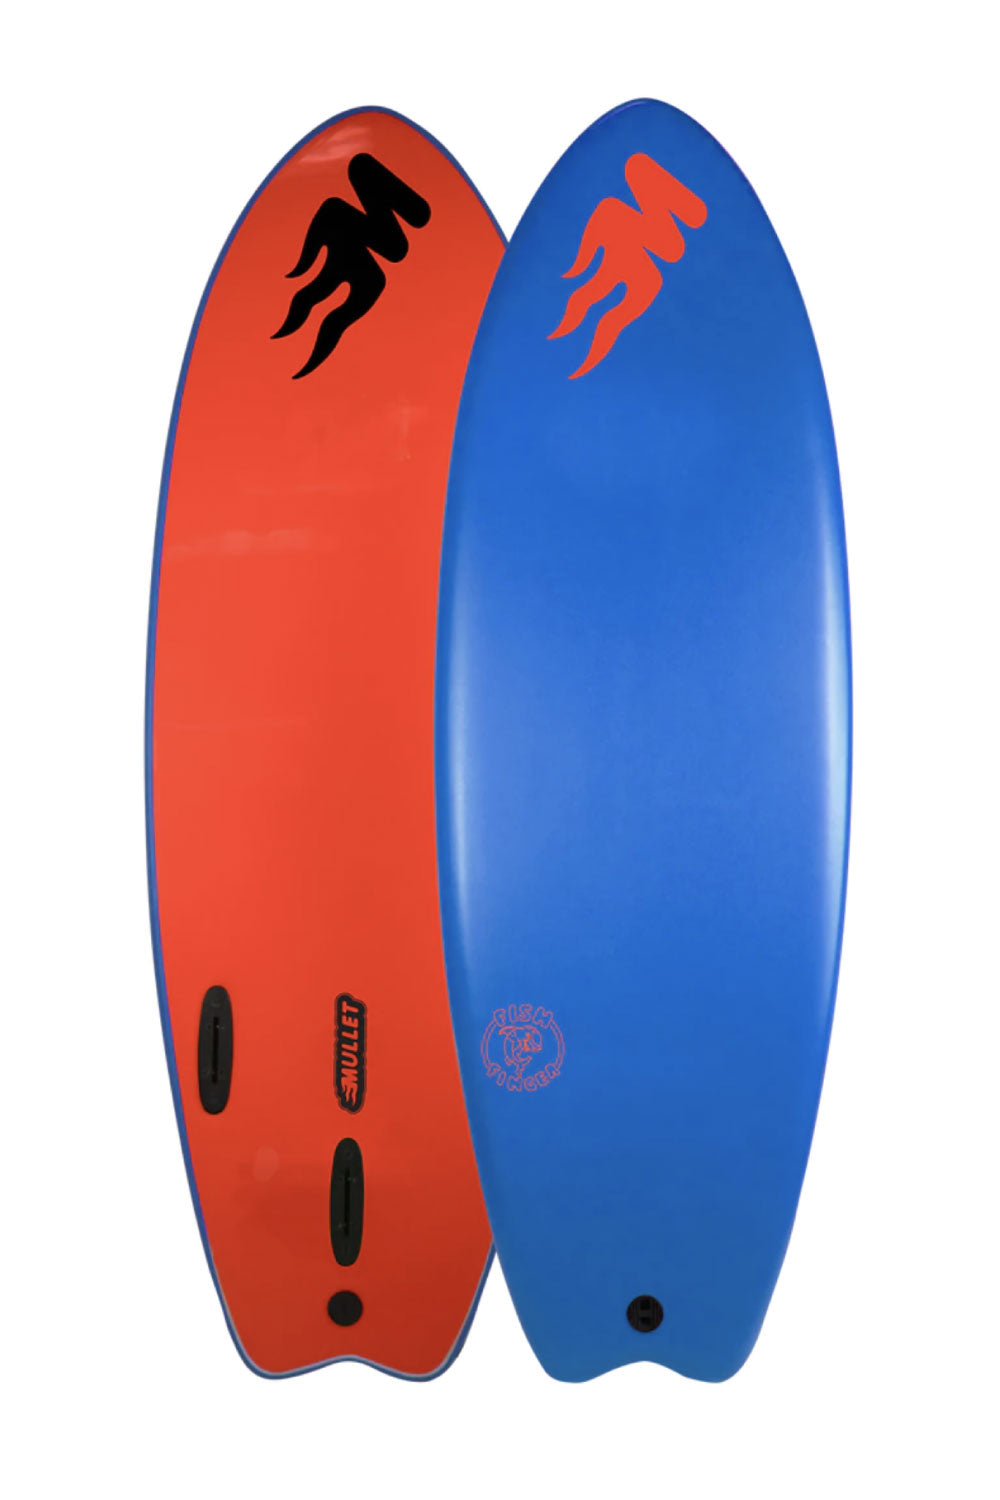 Mullet 5'2 Fish Finger Softboard - Comes with fins